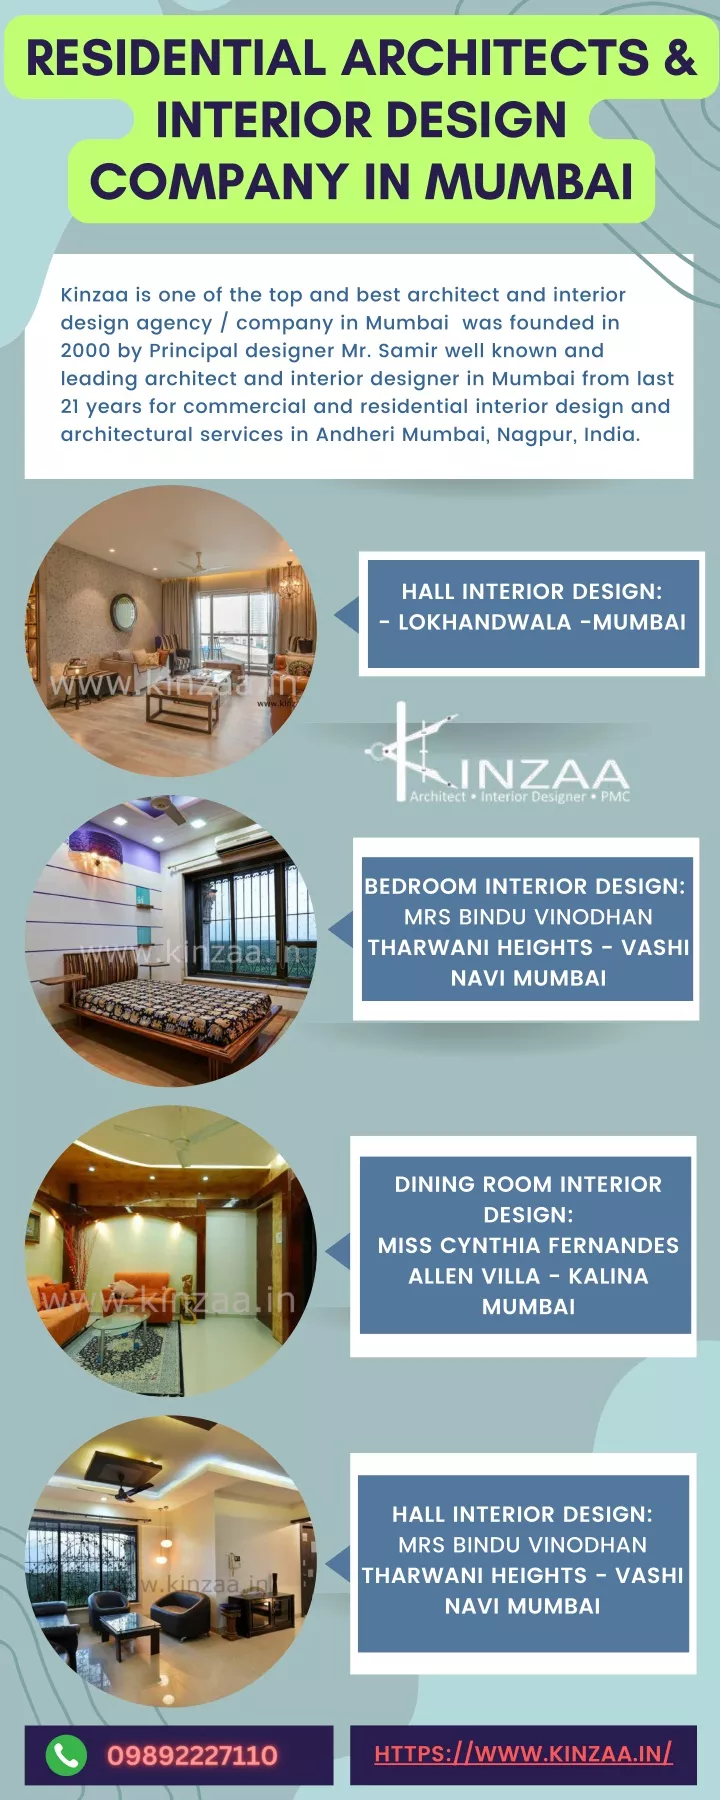 residential architects interior design company